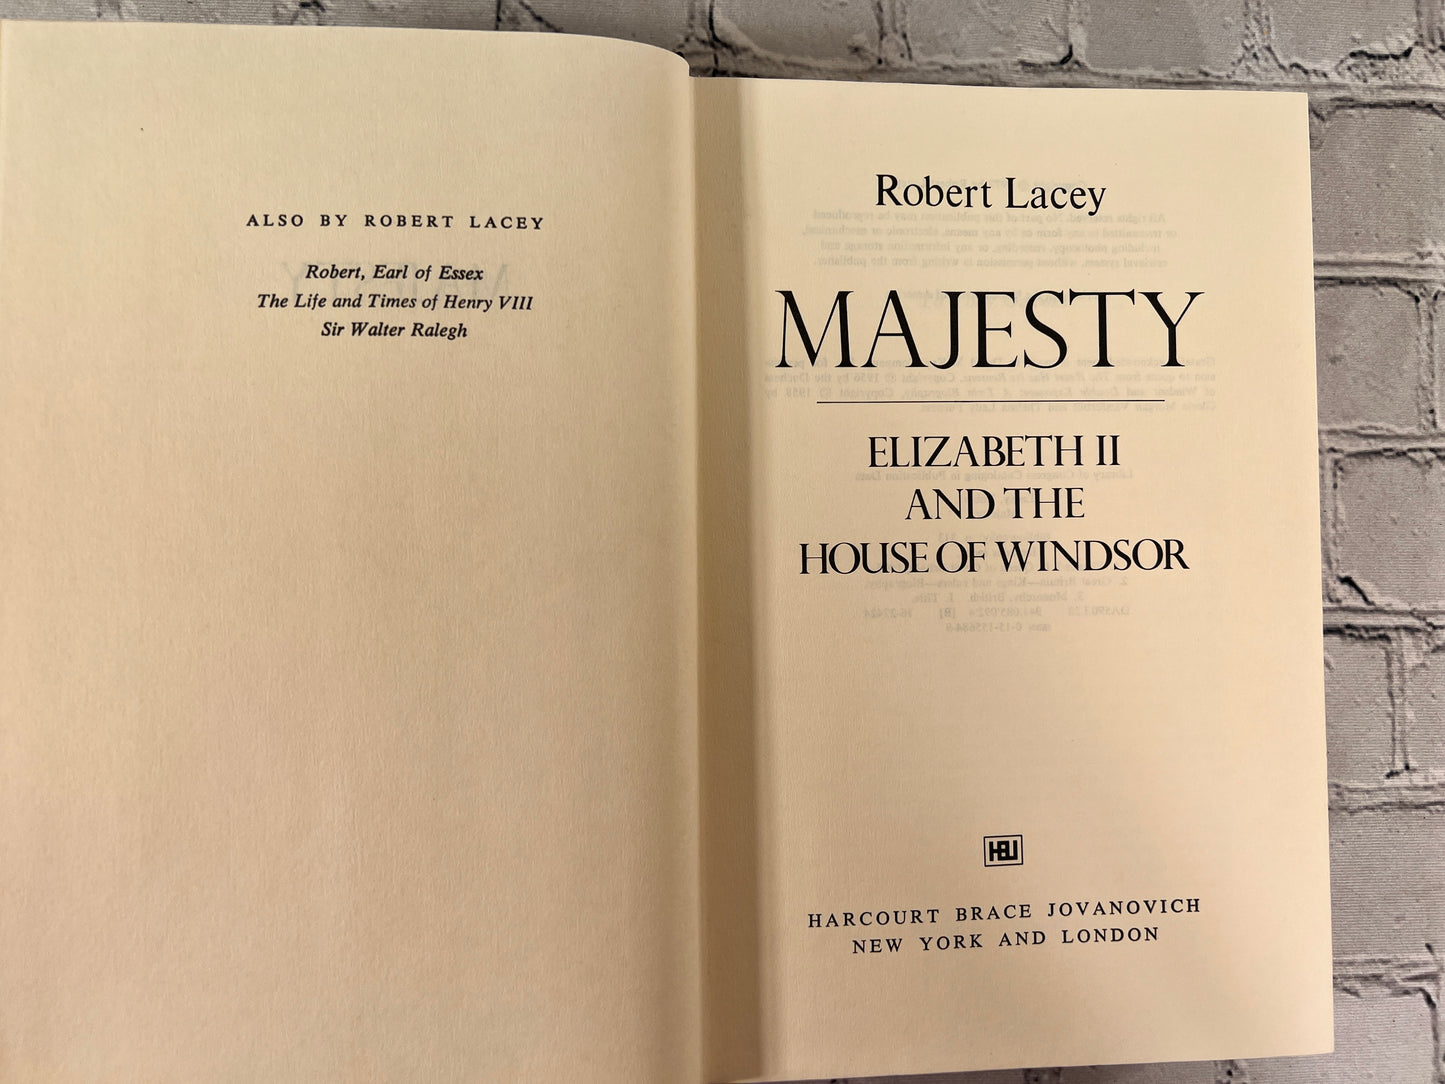 Majesty, Elizabeth II and the House of Windsor by Robert Lacey [1977]